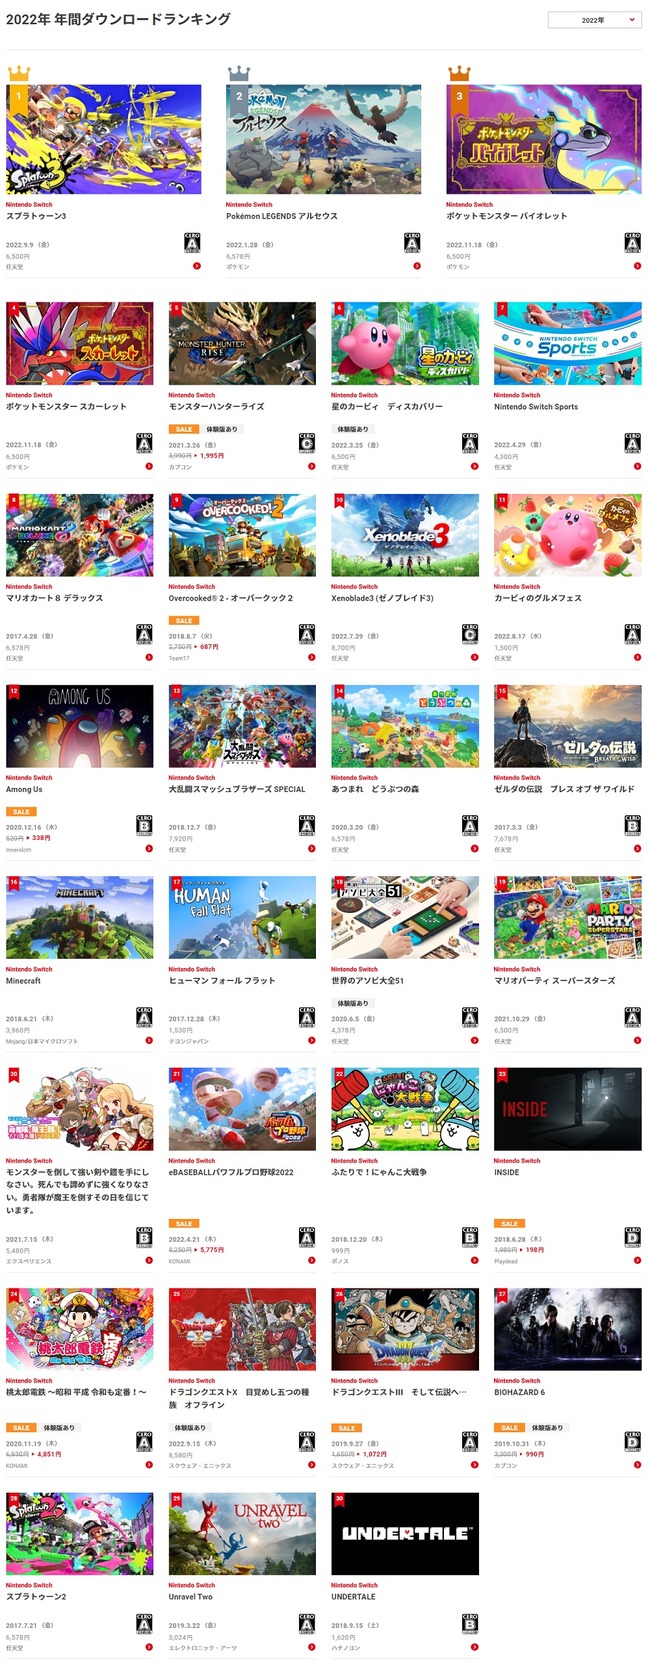 Image related to Nintendo Switch 2022 download version ranking-02